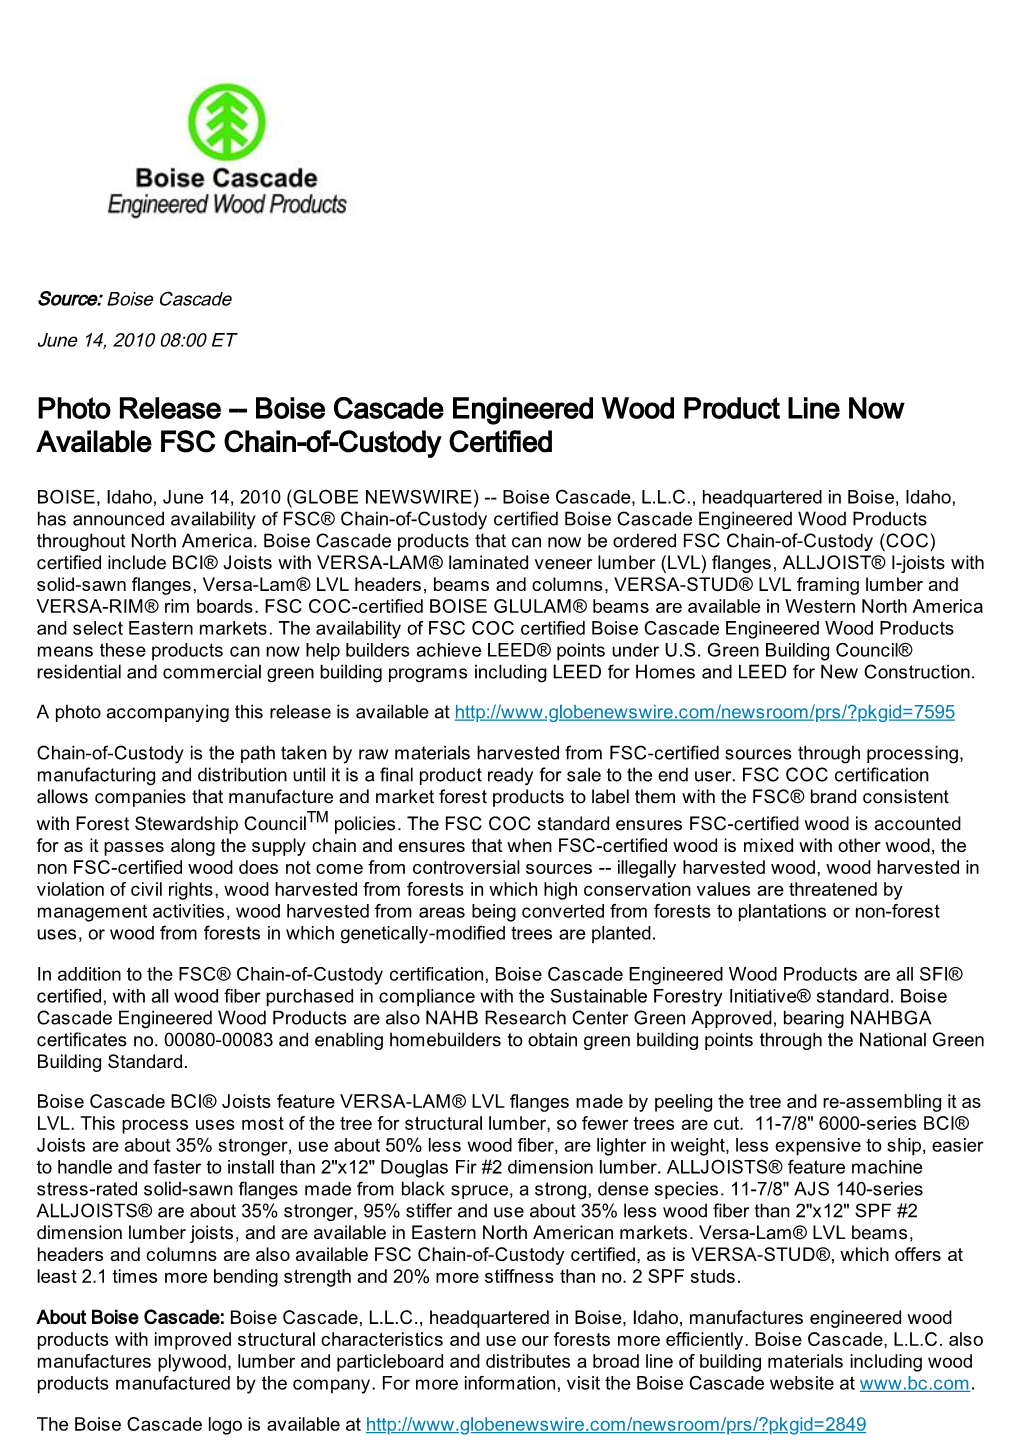 Photo Release -- Boise Cascade Engineered Wood Product Line Now Available FSC Chain-Of-Custody Certified